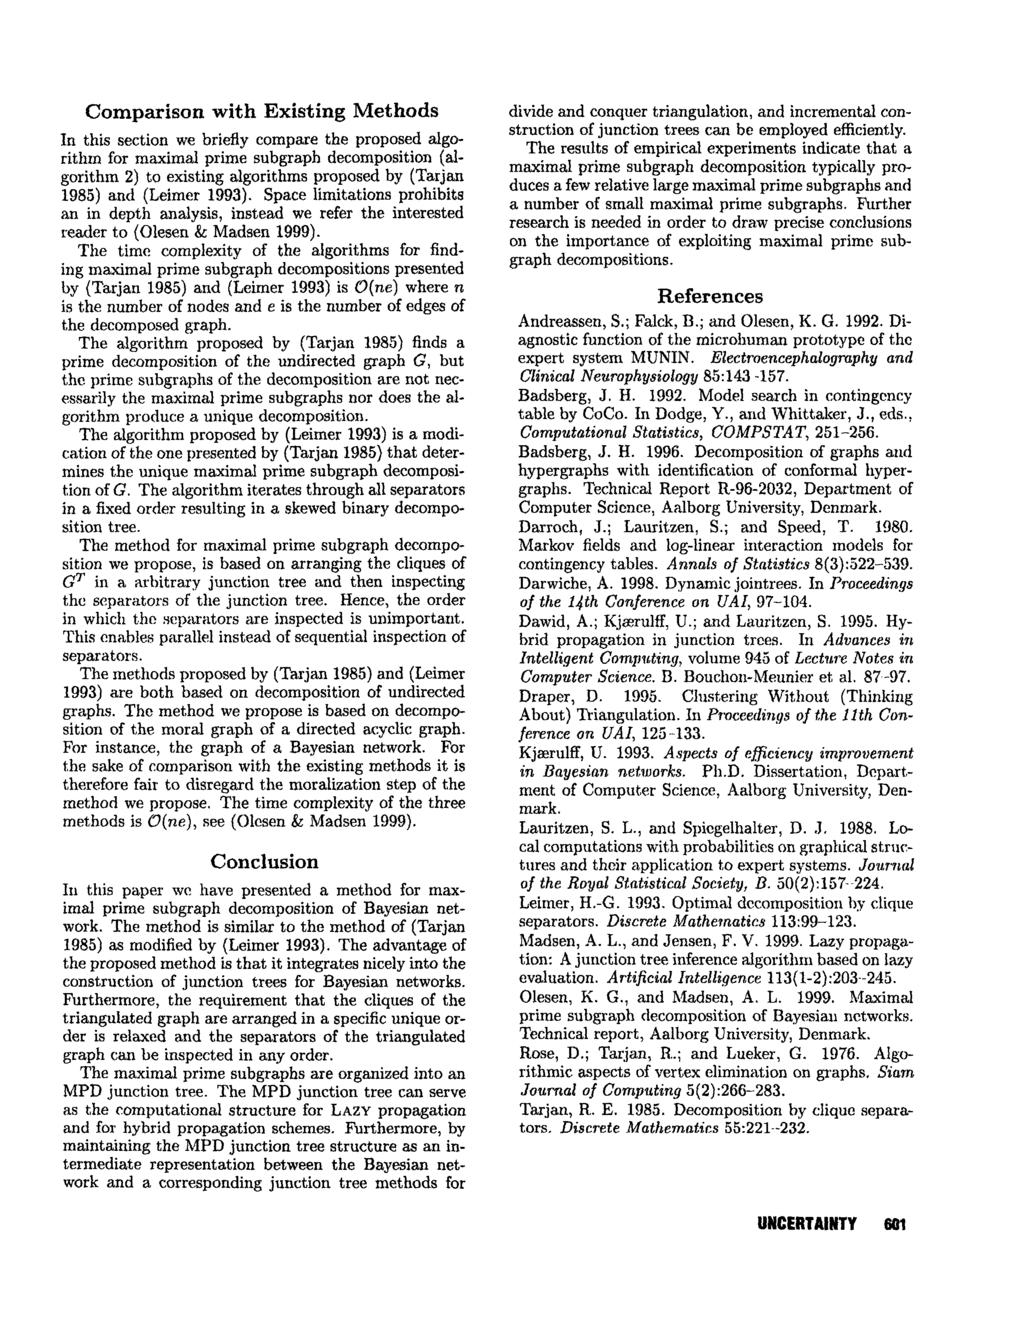 Comparison with Existing Methods In this section we briefly compare the proposed algorithm for maximal prime subgraph decomposition (algorithm 2) to existing algorithms proposed by (Tar jan 1985) and